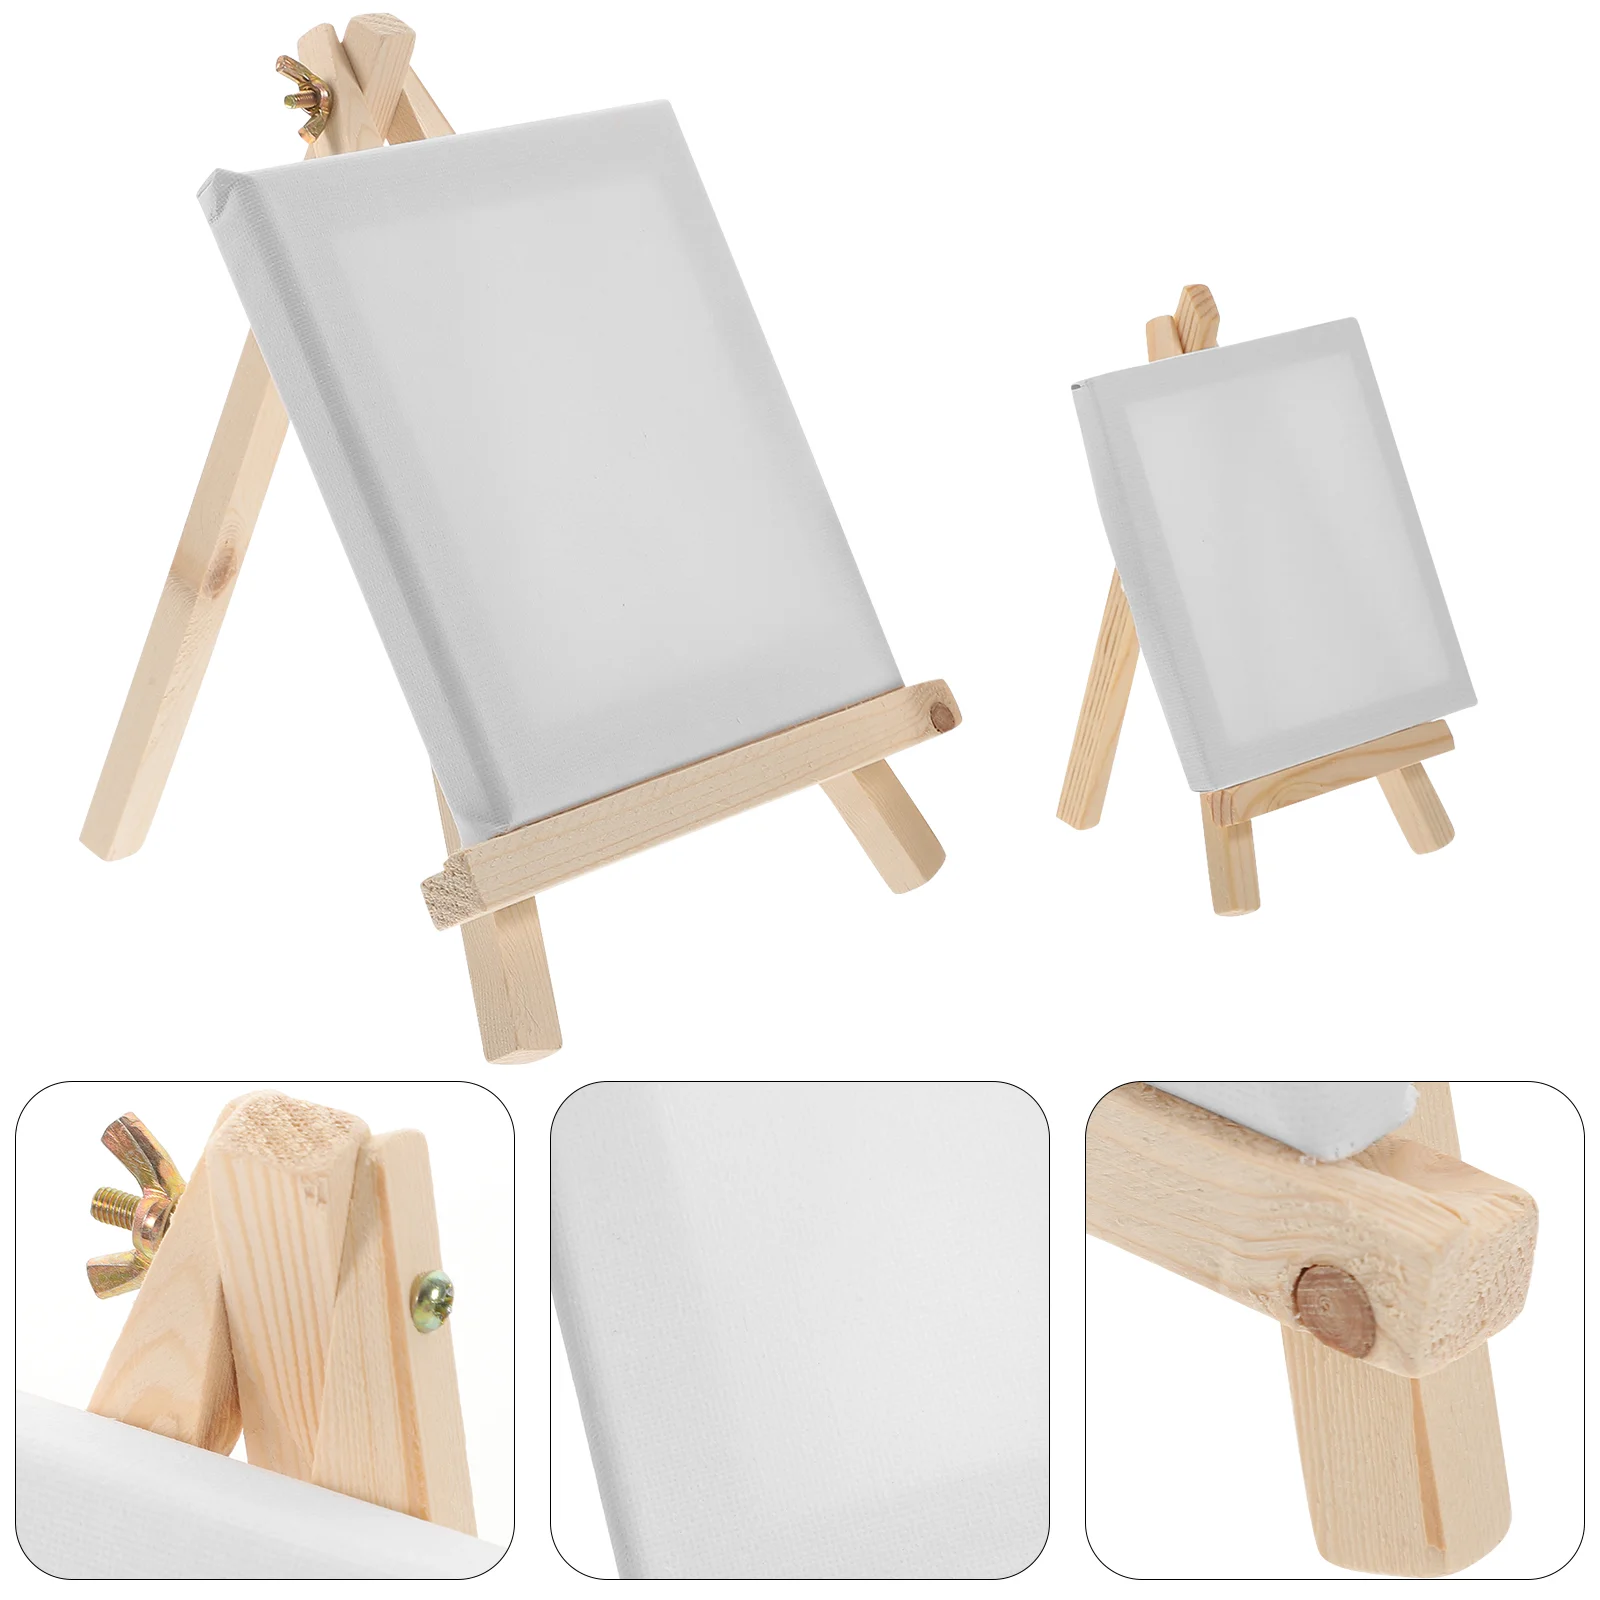 2PCs Canvas Easel Set White Blank Stretched Canvas with Wooden Easel Canvas Panel Boards for Artist Painting Business Wedding